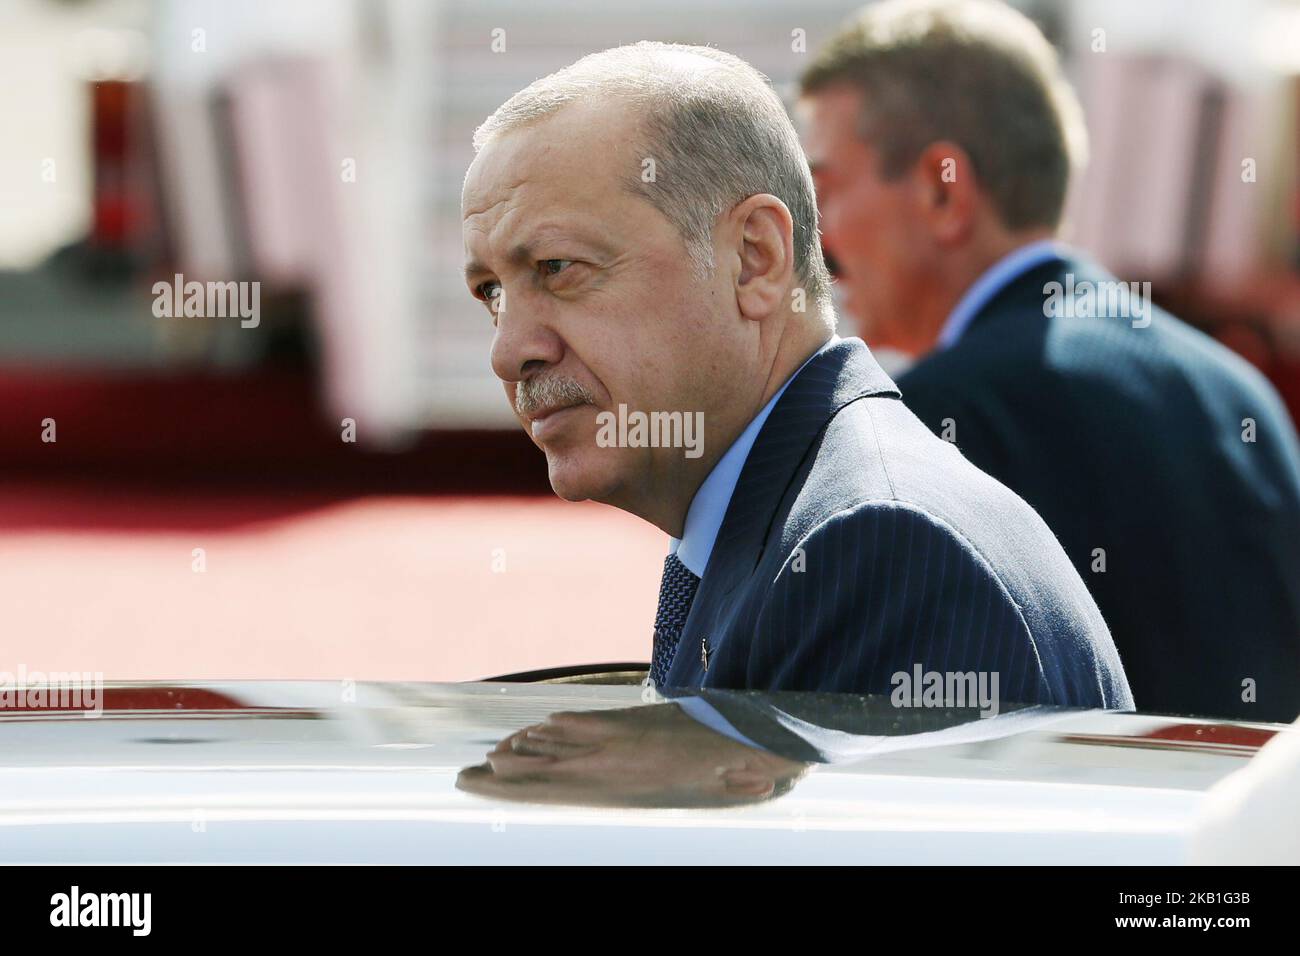 Turkish President Recep Tayyip Erdogan gets into the presidential car after his arrival at Tegel airport in Berlin, Germany on September 27, 2018. Erogan will be on official visit in Germany from September 27 to 29, 2018. (Photo by Emmanuele Contini/NurPhoto) Stock Photo